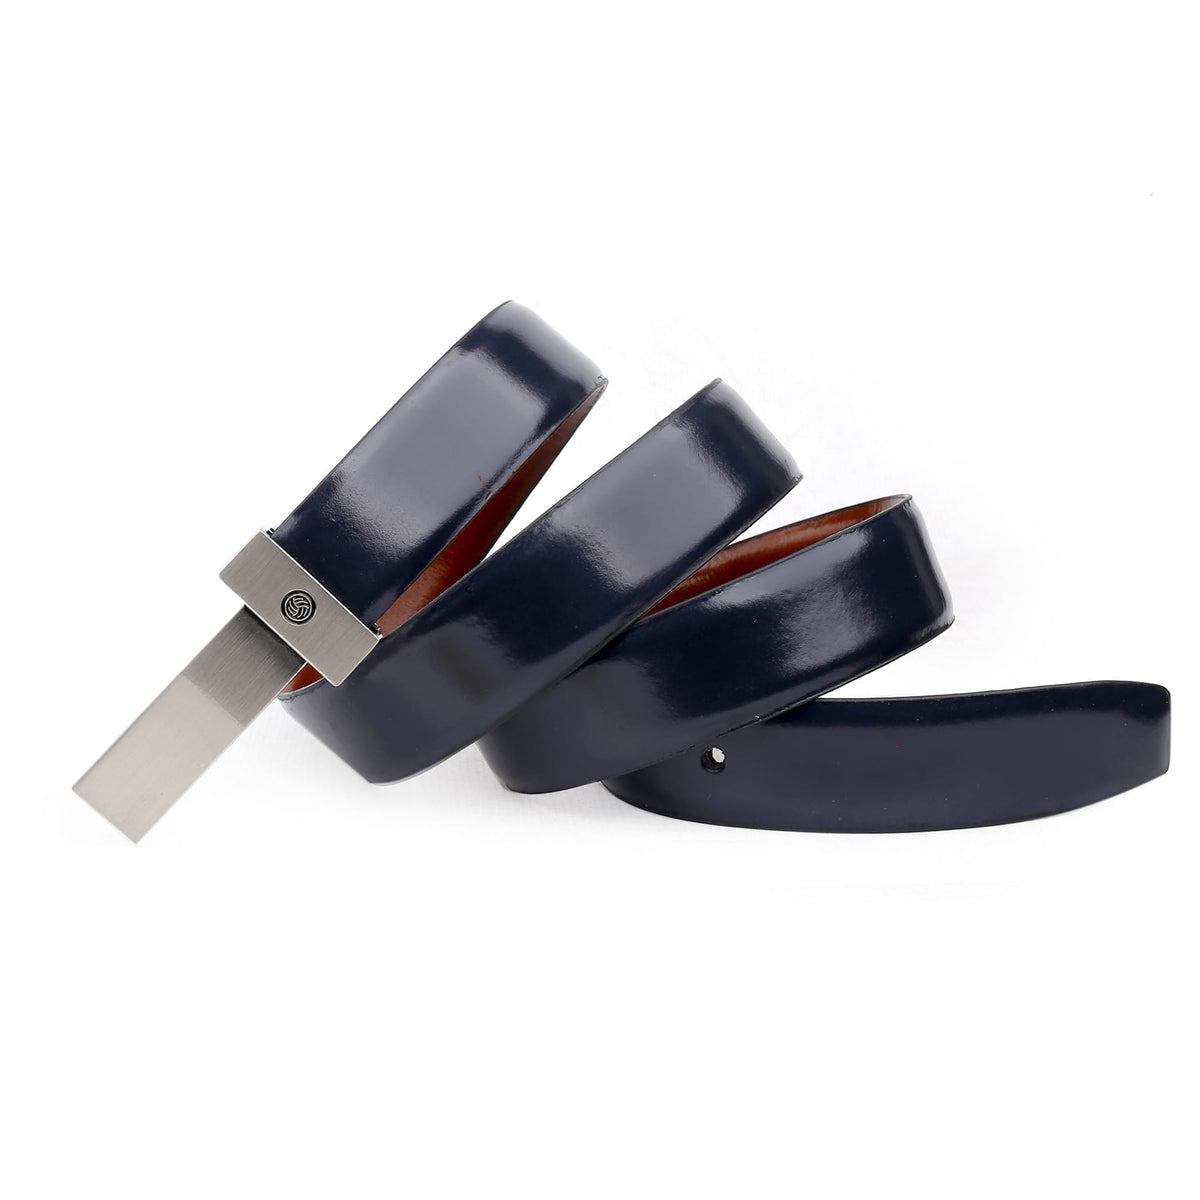 Bacca Bucci Premium Leather Formal Dress Belts with a Glossy Finish and a Nickel-Free Buckle